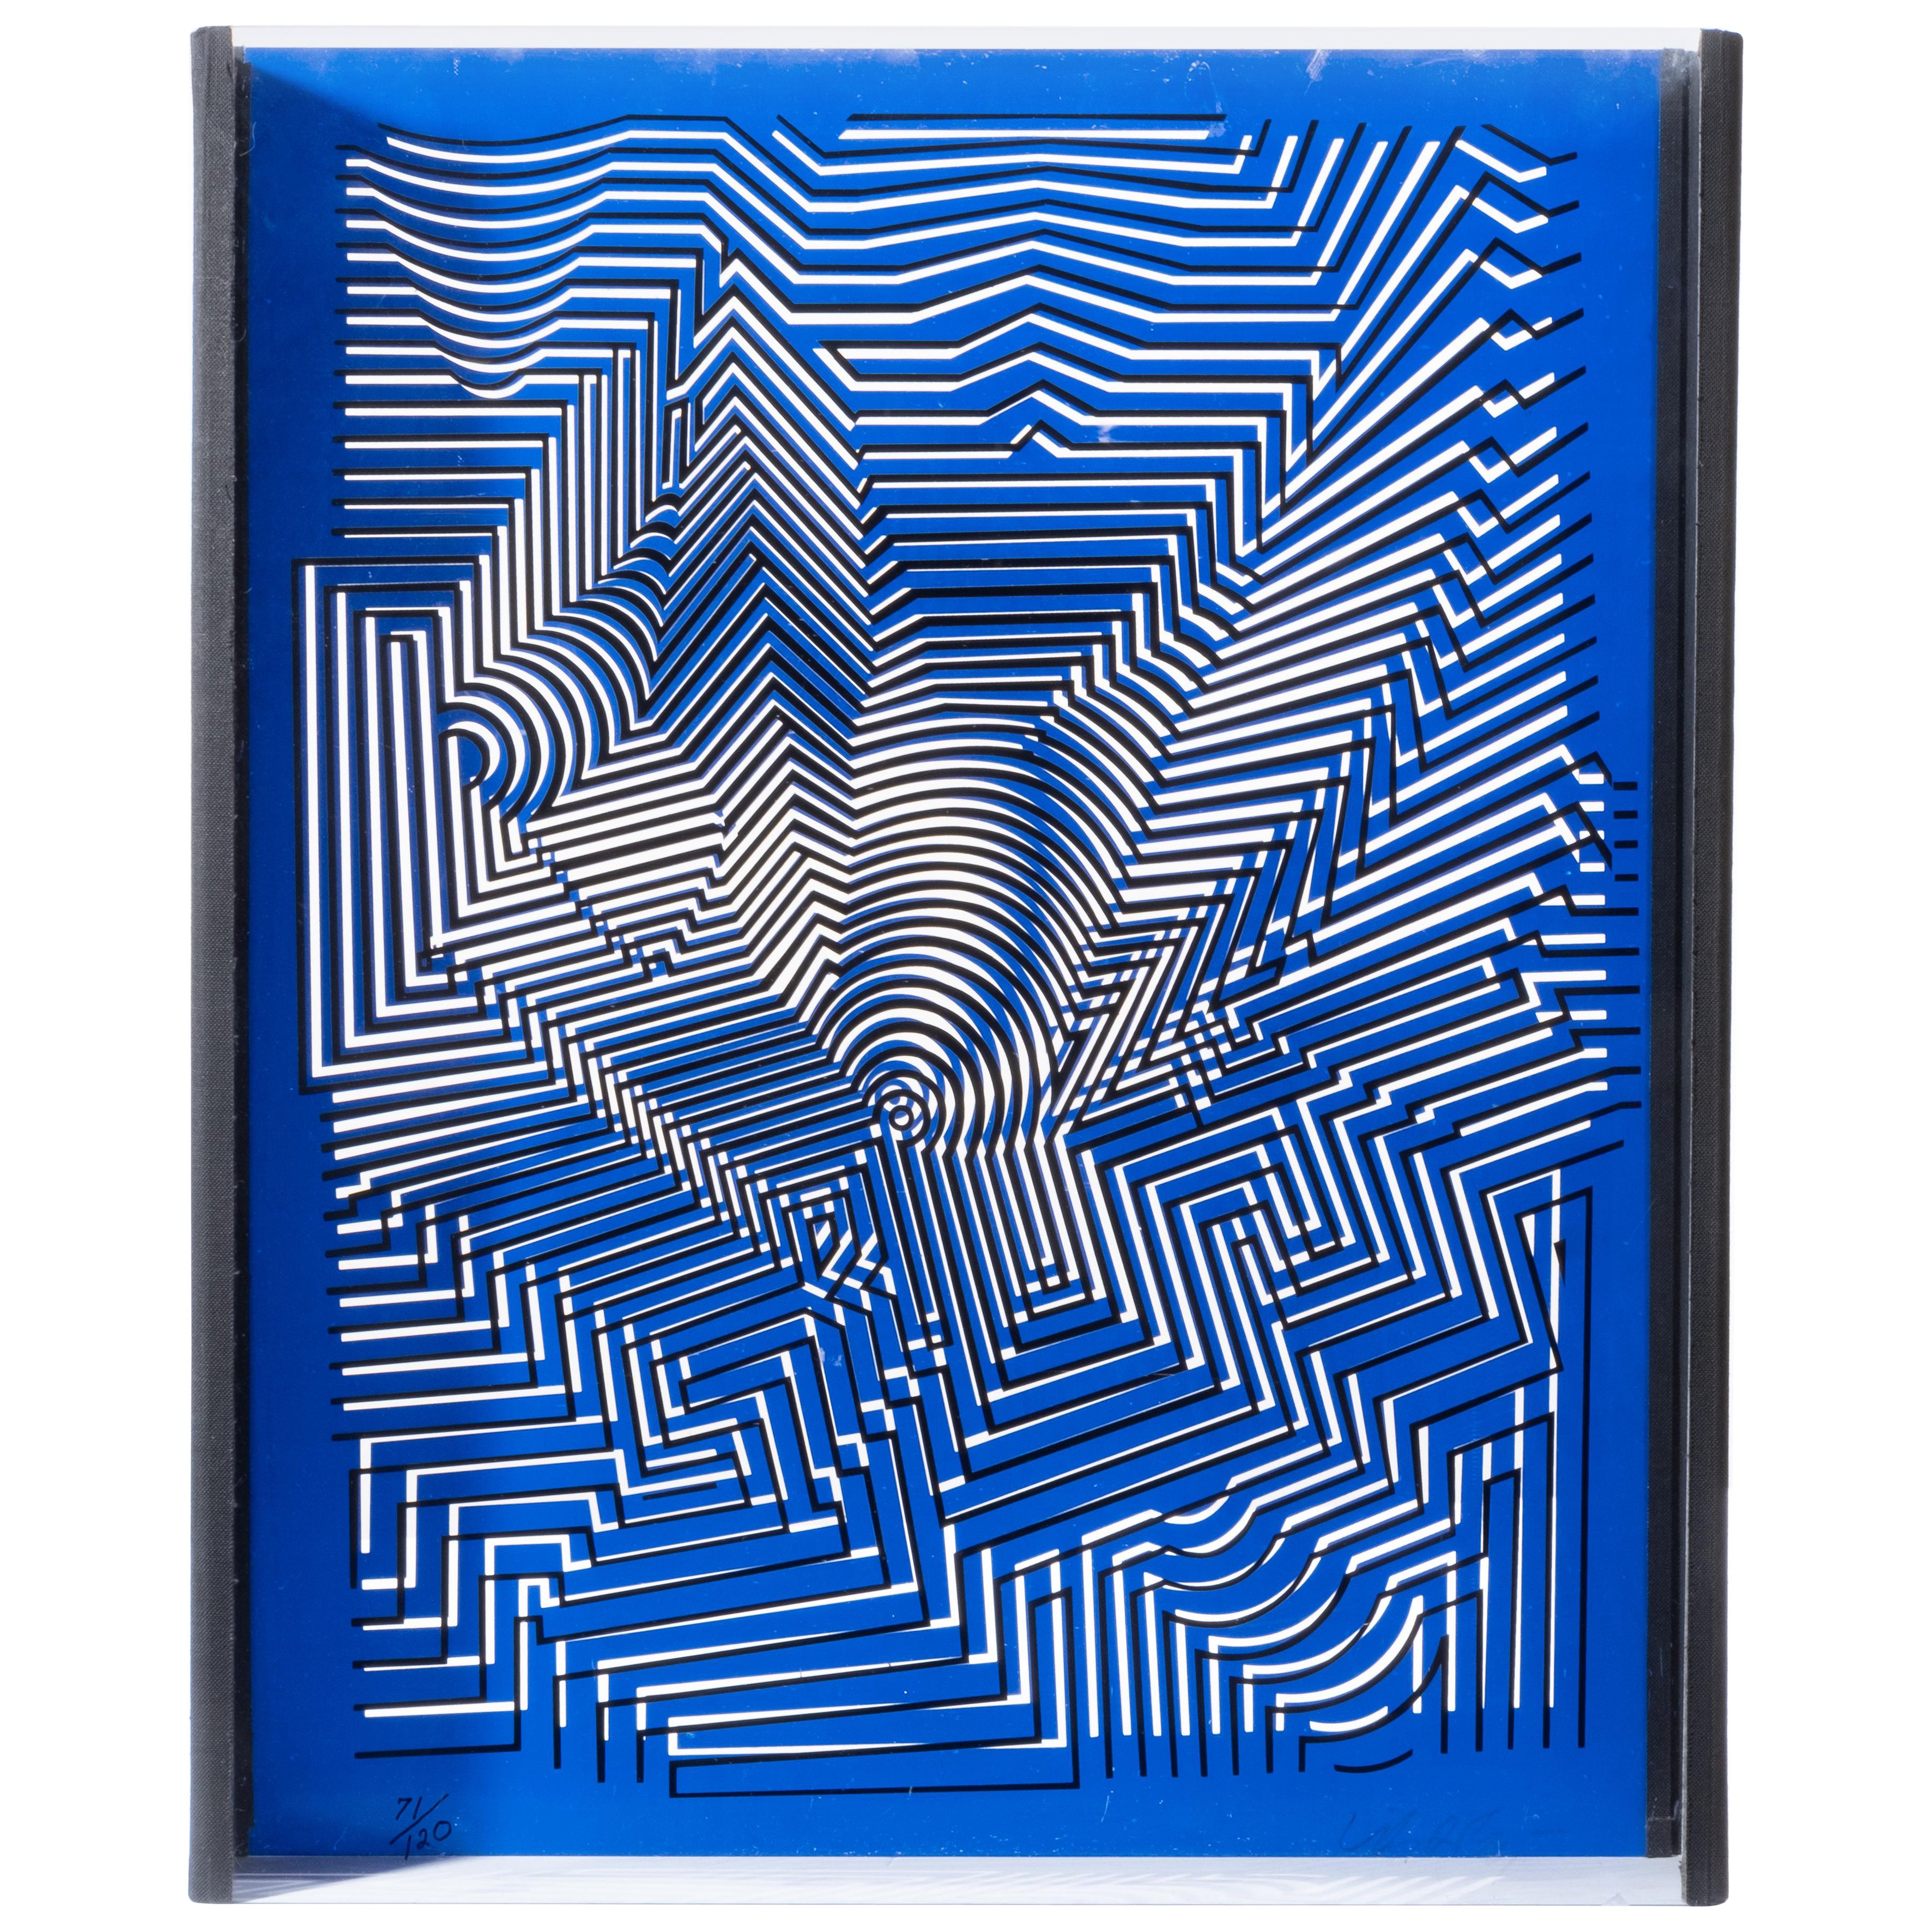 Victor Vasarely Signed  Sculpture "Linienspiel (Line Game)" Limited Edition